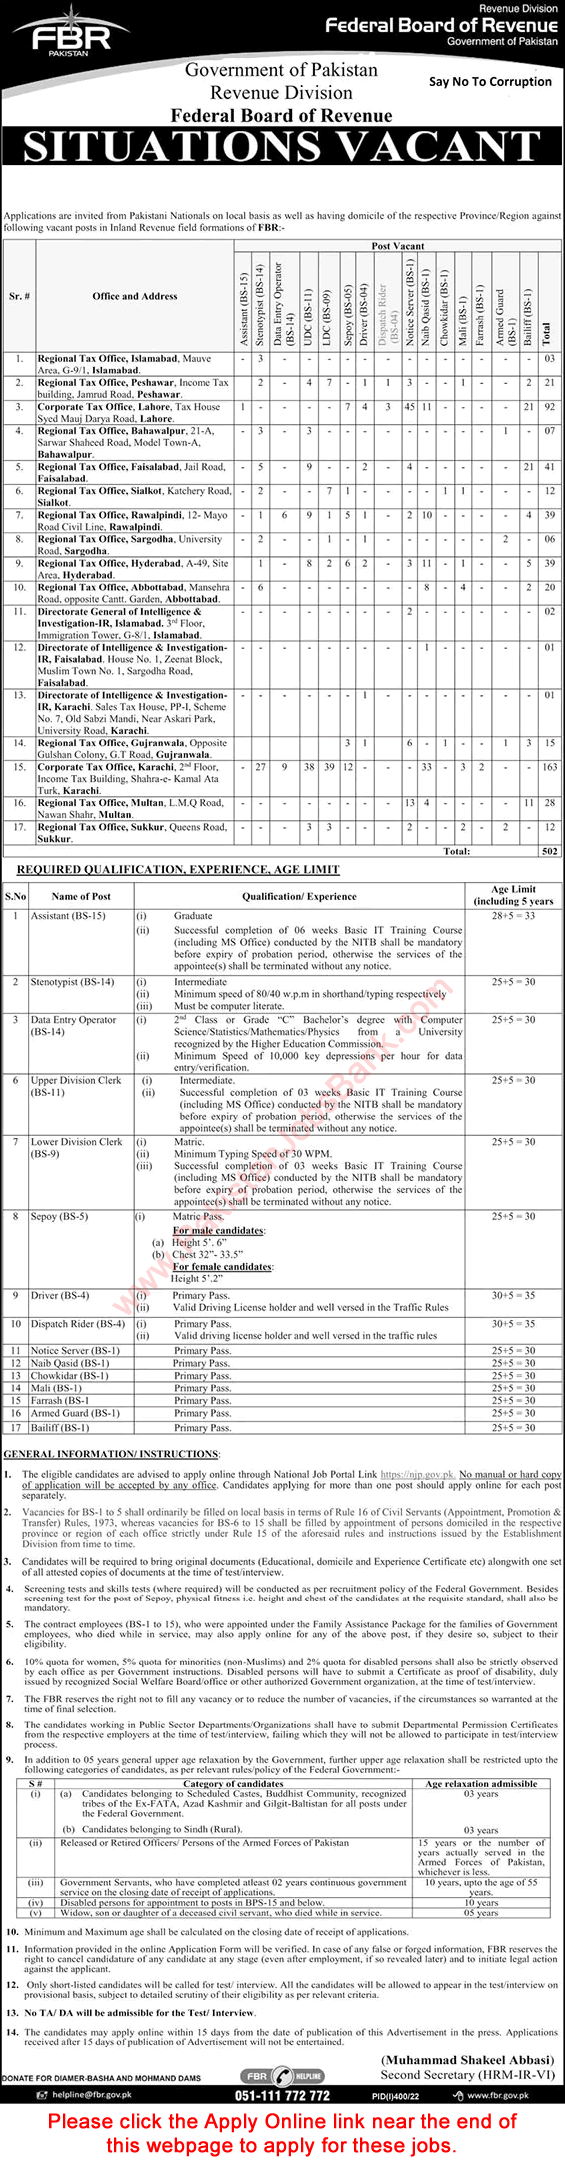 FBR Jobs July 2022 Online Apply Stenotypists, Clerks, Naib Qasid & Others Federal Board of Revenue Latest